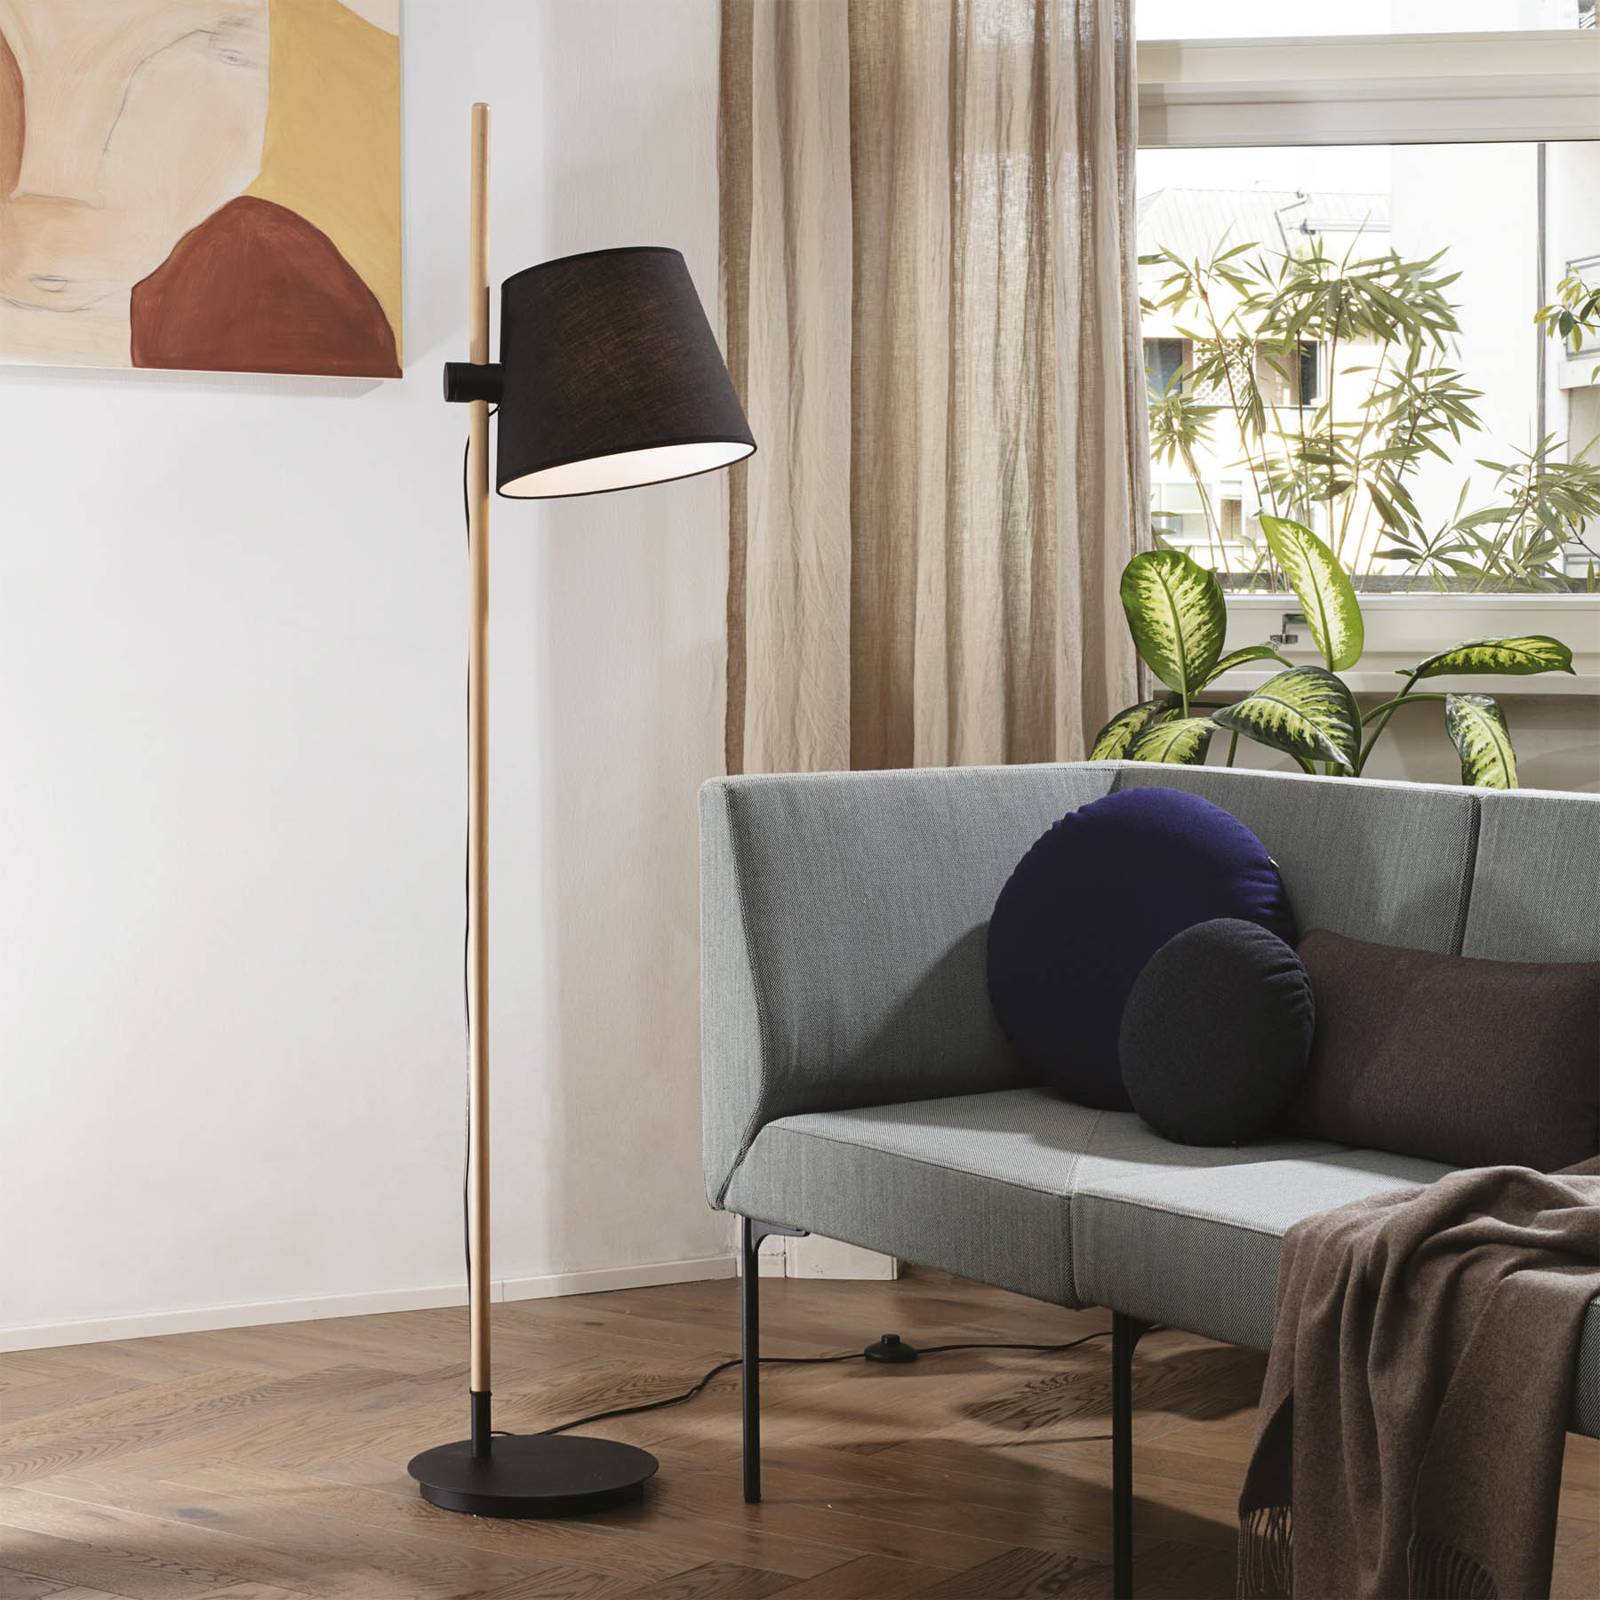 Ideallux Ideal Lux Axel floor lamp with wood, black/natural